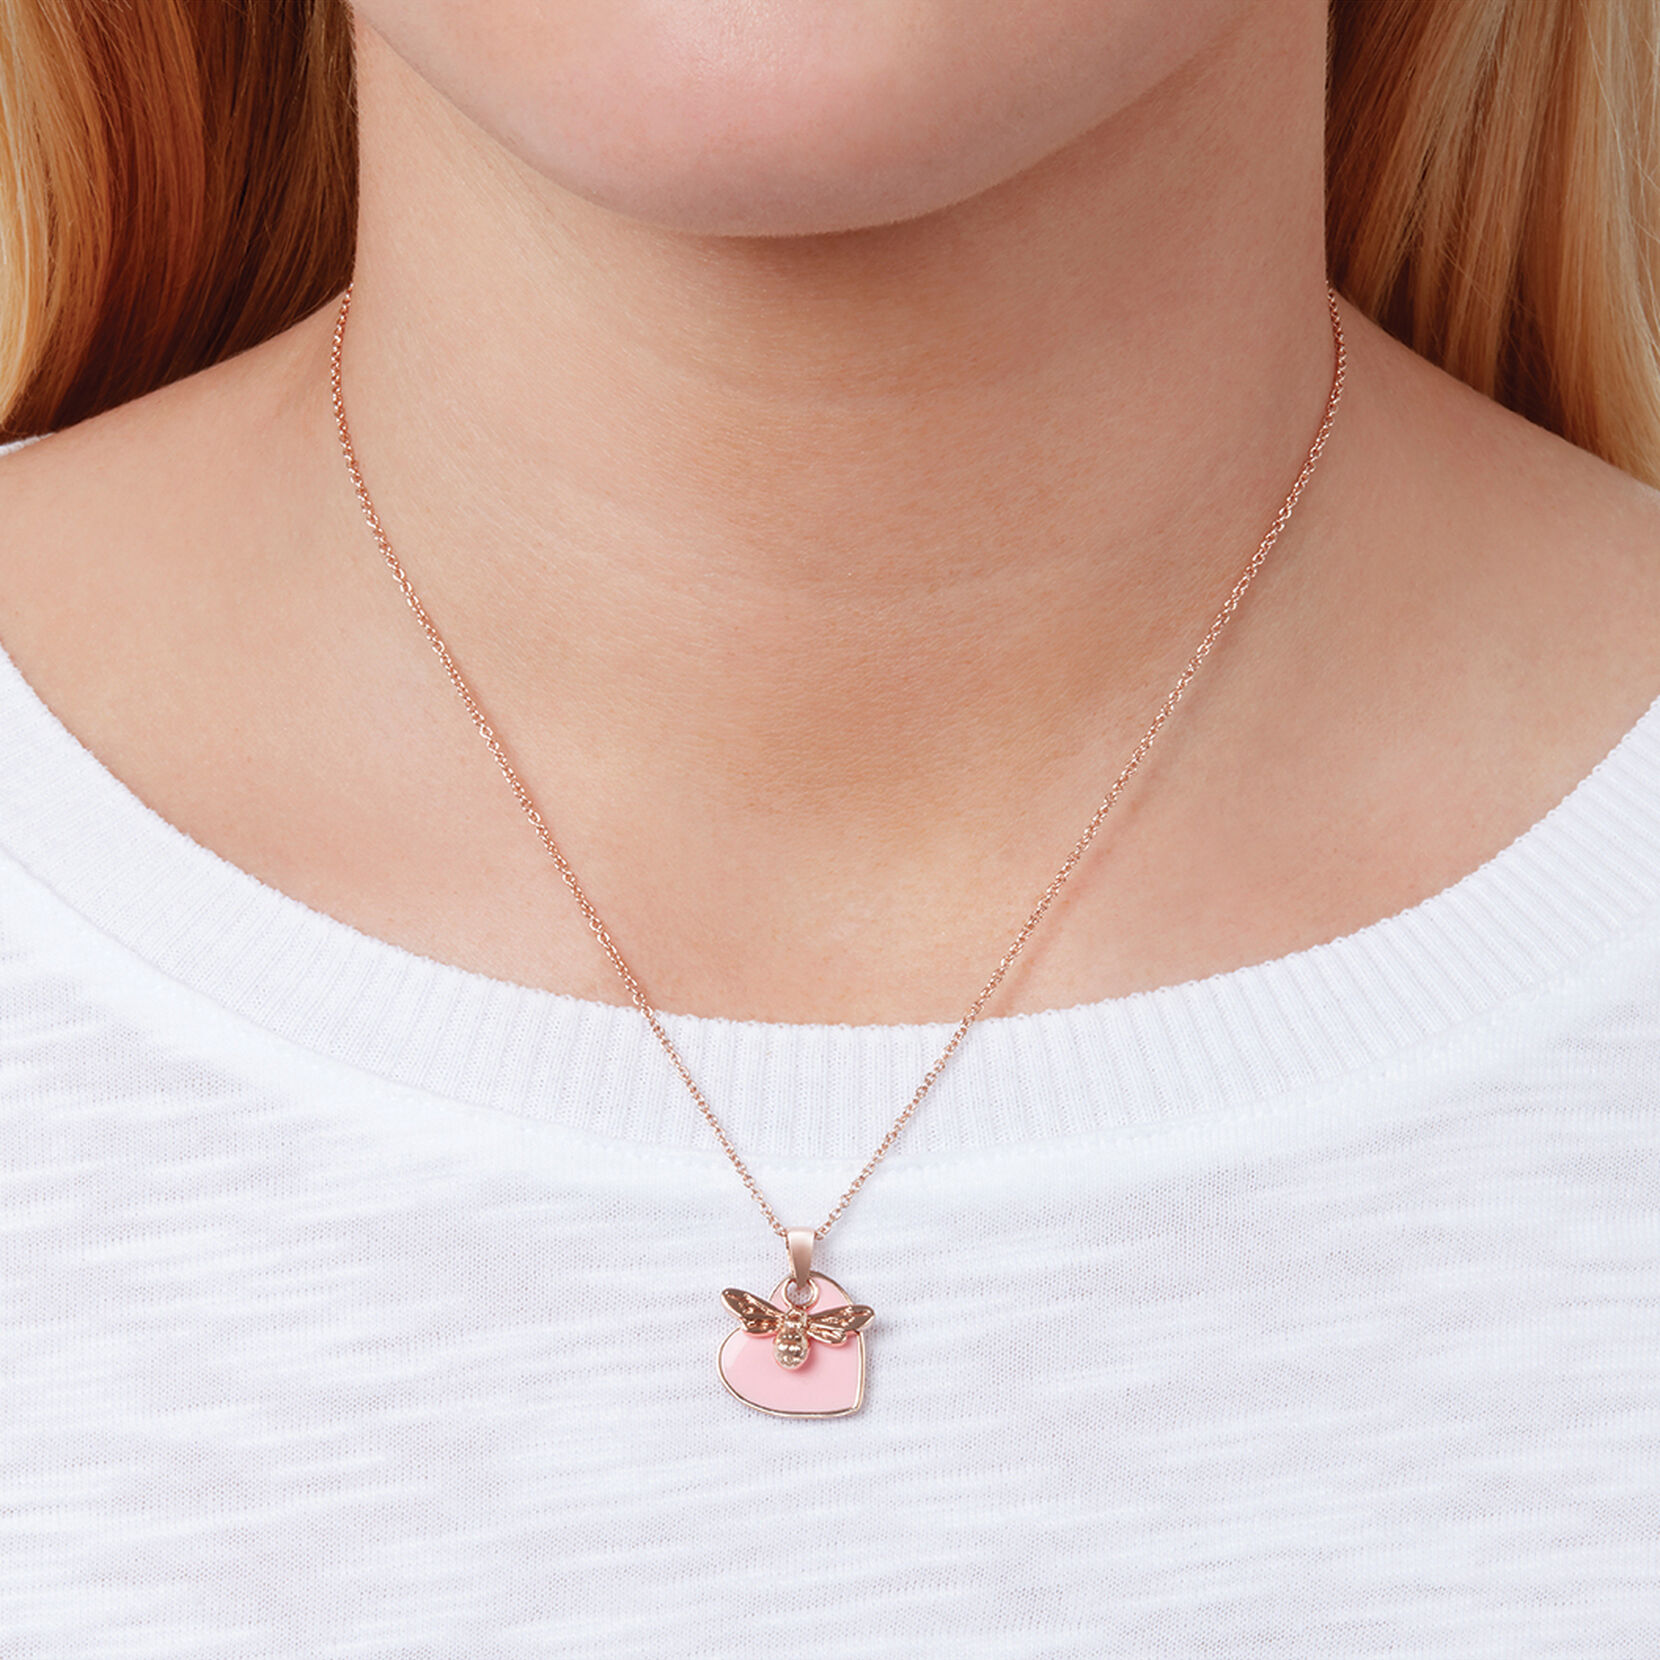 You Have My Heart Rose Gold Heart Necklace